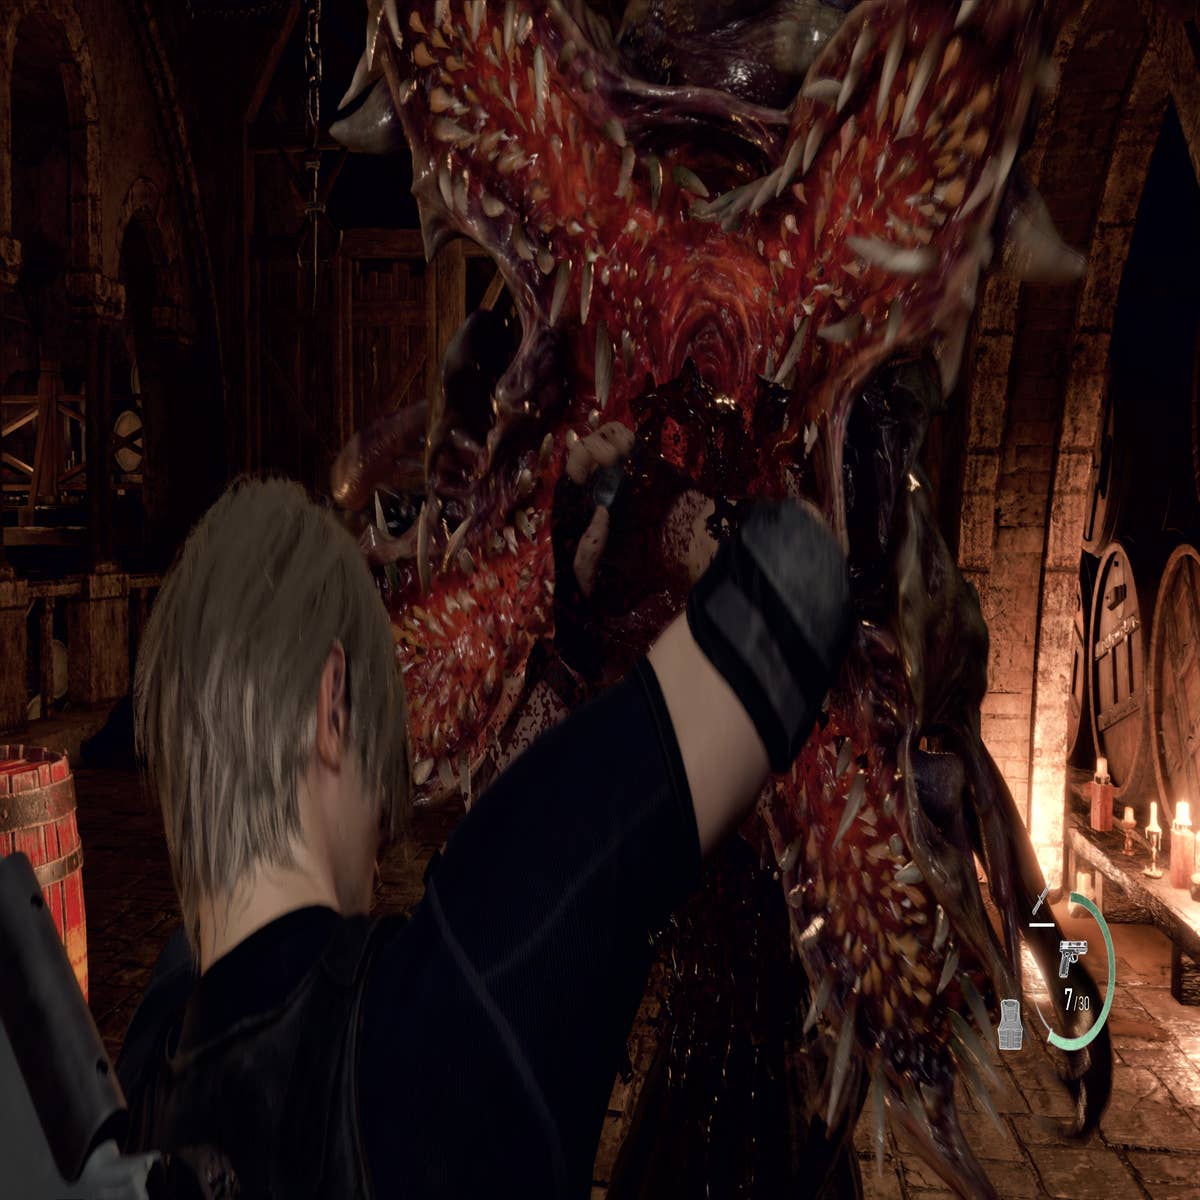 That Resident Evil 4 Remake looks promising : r/DevilMayCry